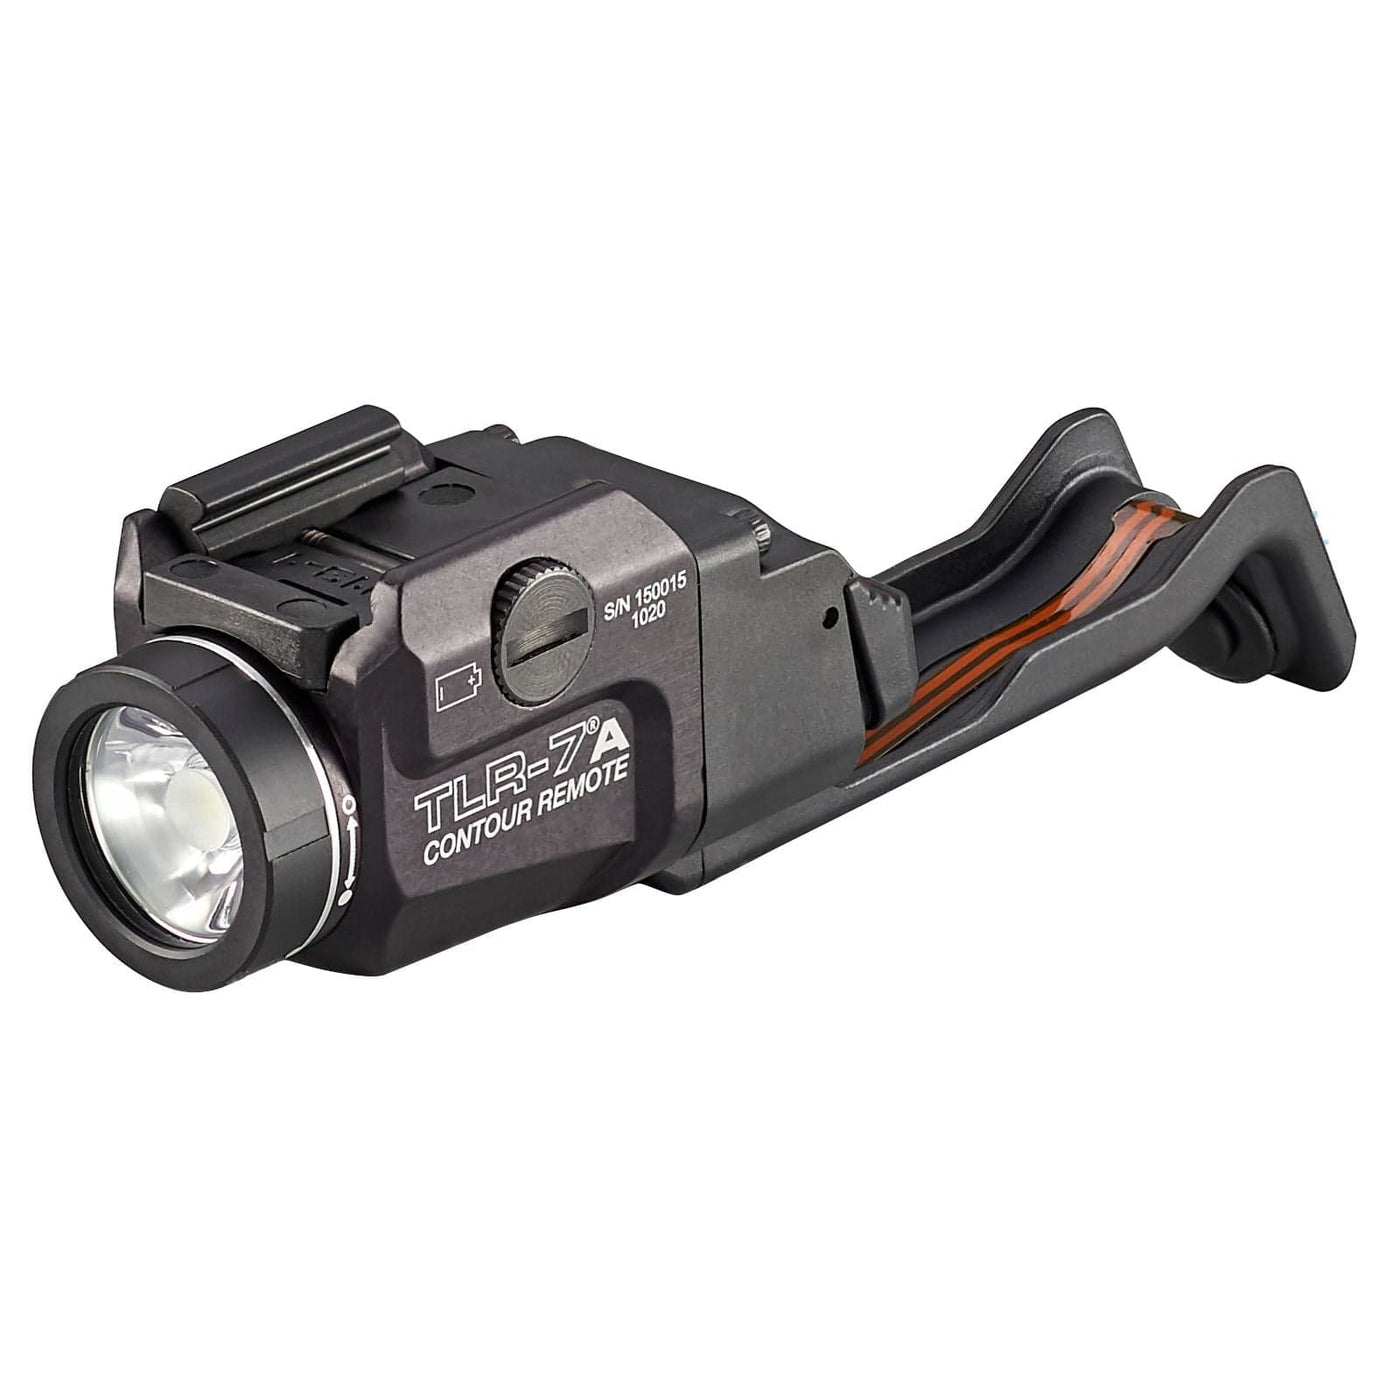 Streamlight Streamlight TLR-7A w Integrated Contour Remote Switch Glock Lights